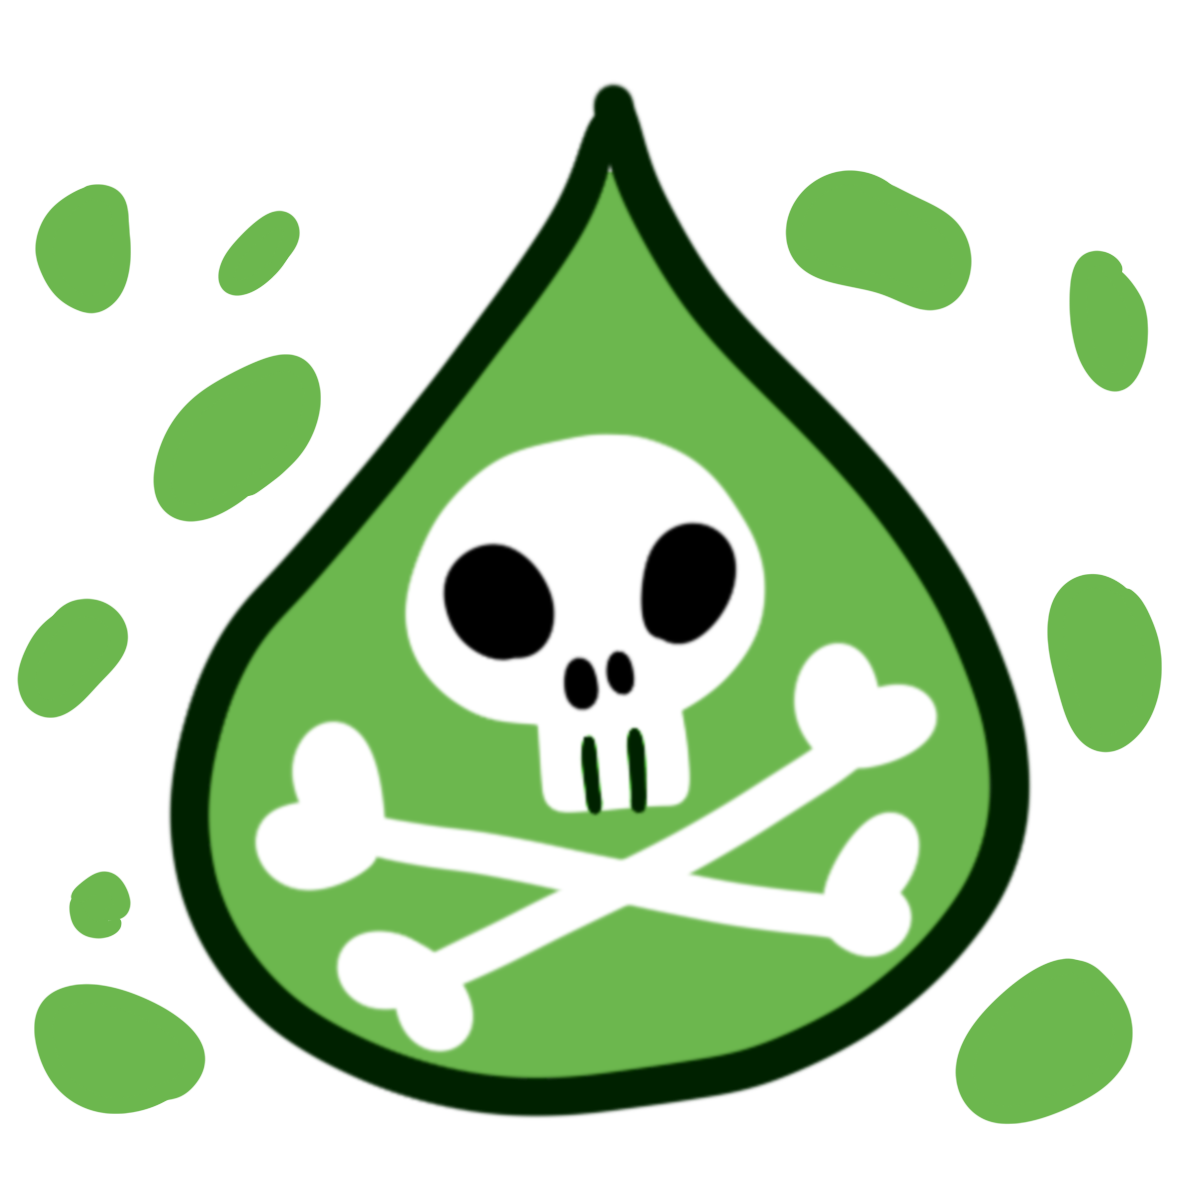  a green droplet with white skull and crossbones surrounded by green blobs.